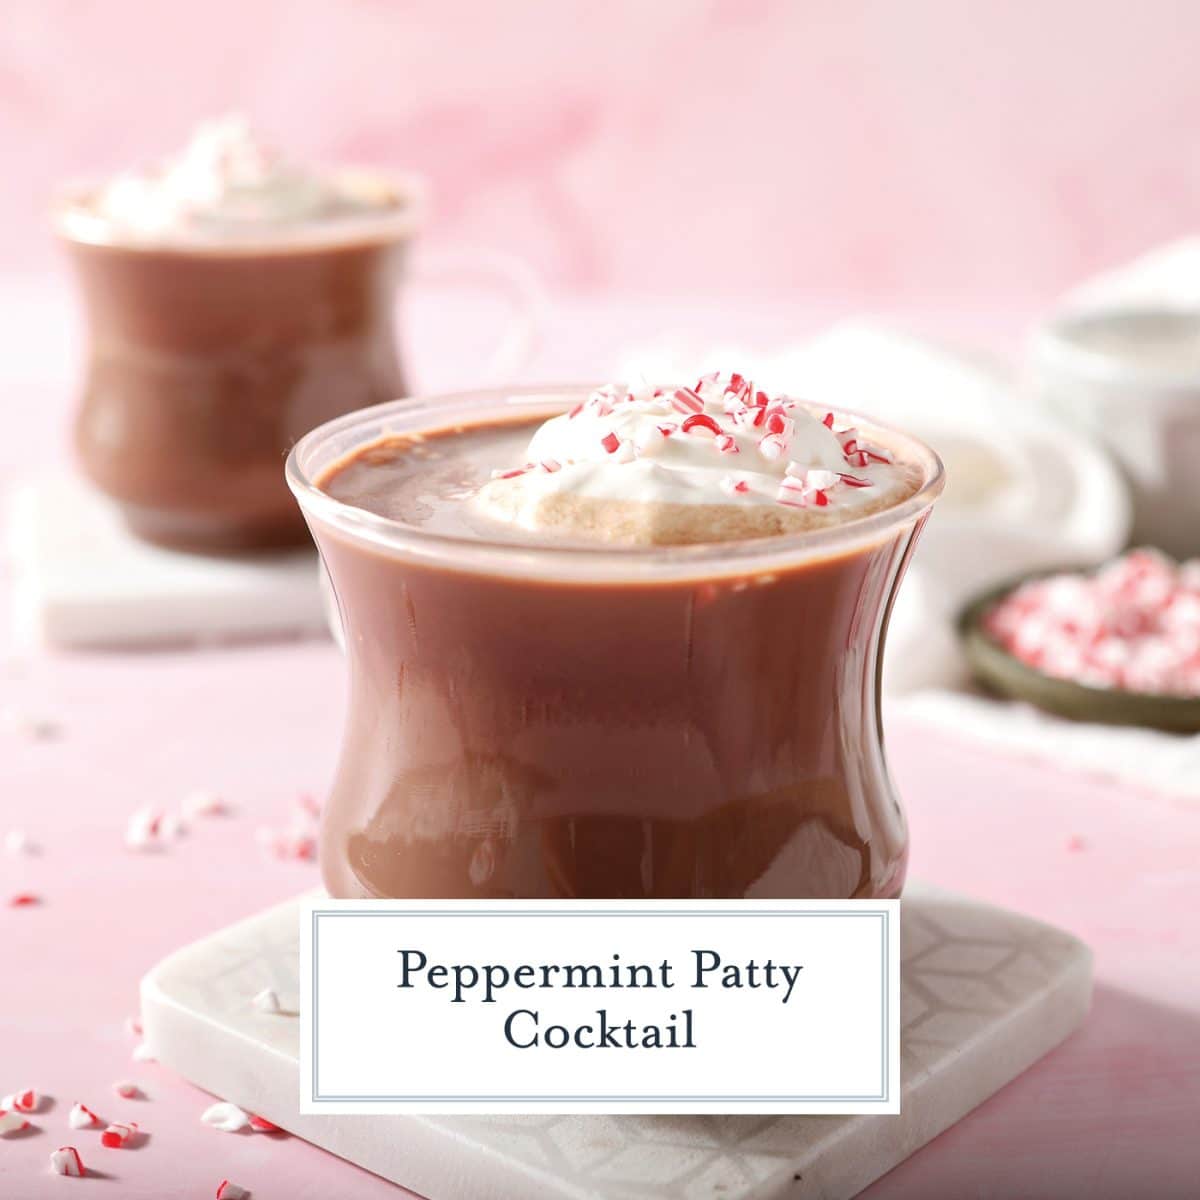 mug of peppermint patty cocktail with text overlay for facebook